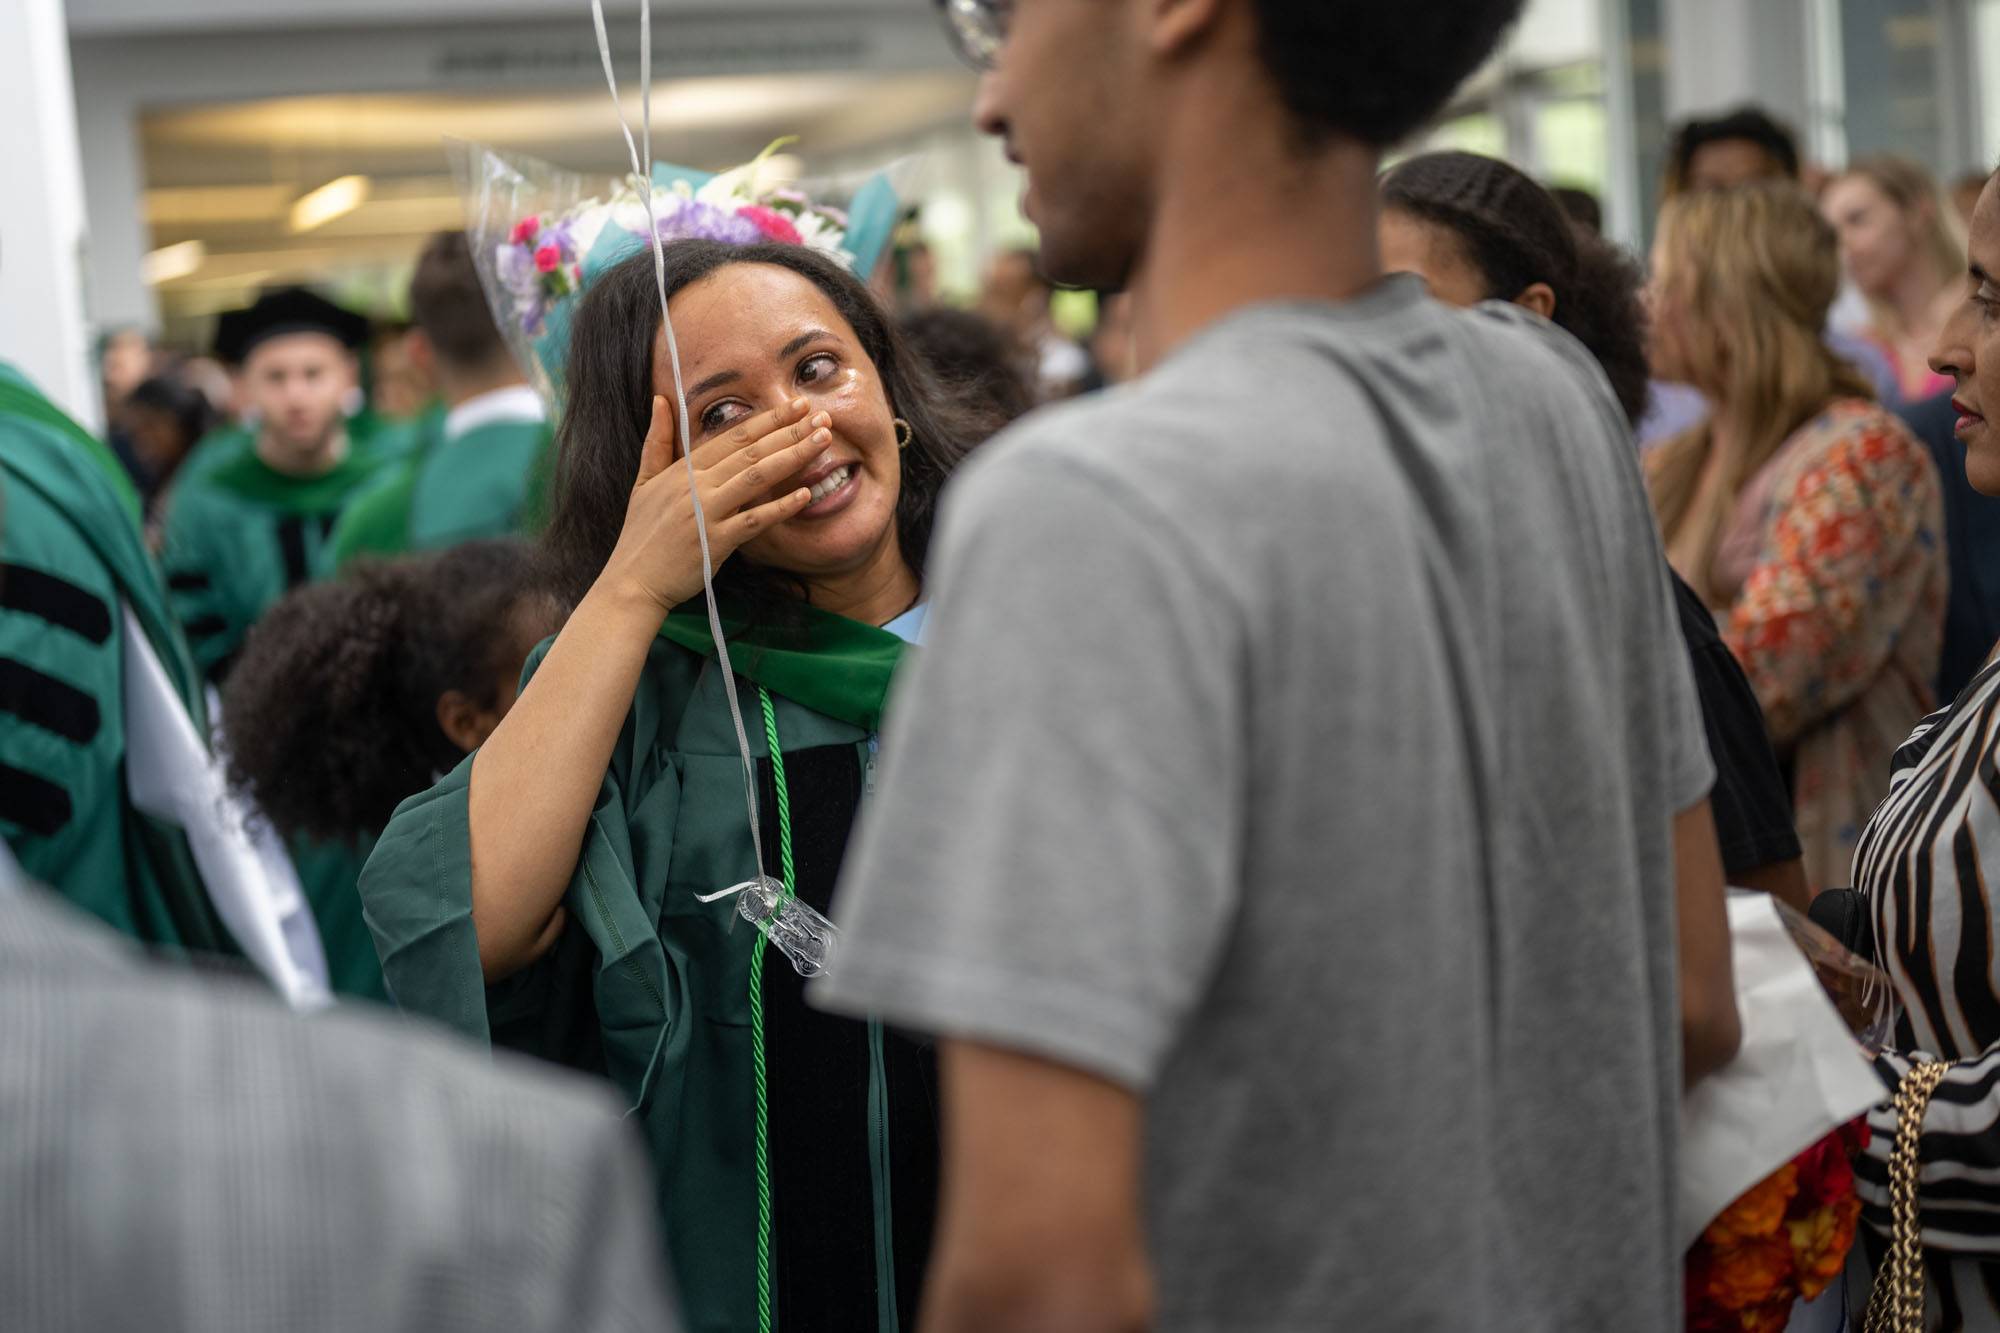 In all, 238 newly-minted Heritage College graduates departed the Convocation Center to make their mark as physicians. In the words of Commencement Speaker Tyree Winters, D.O., 